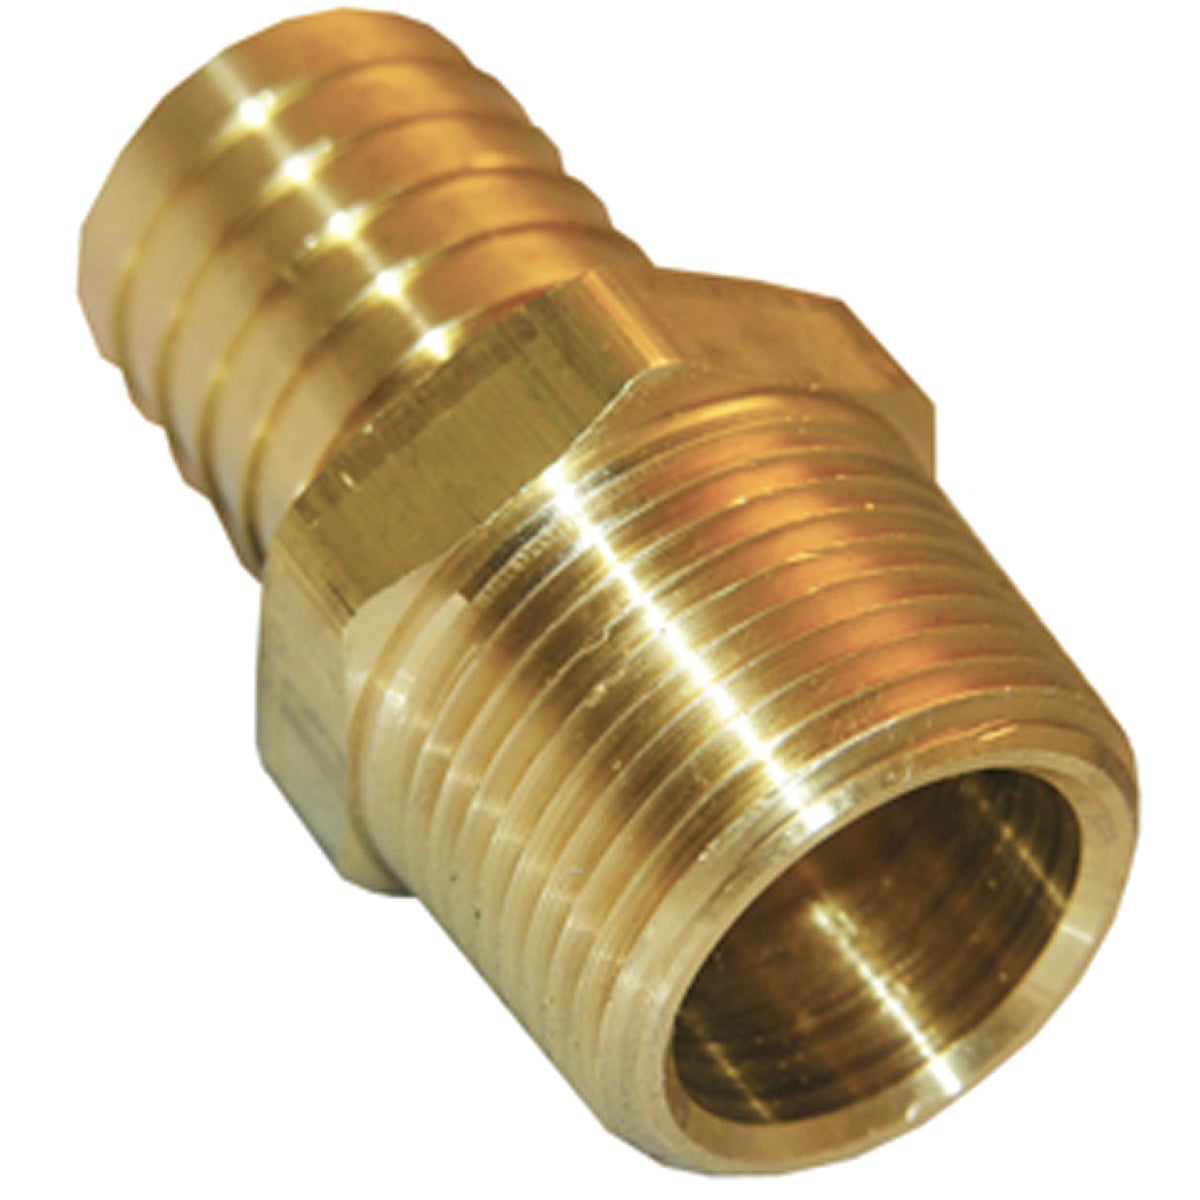 Lasco 1/2 In. MPT x 3/8 In. Brass Hose Barb Adapter